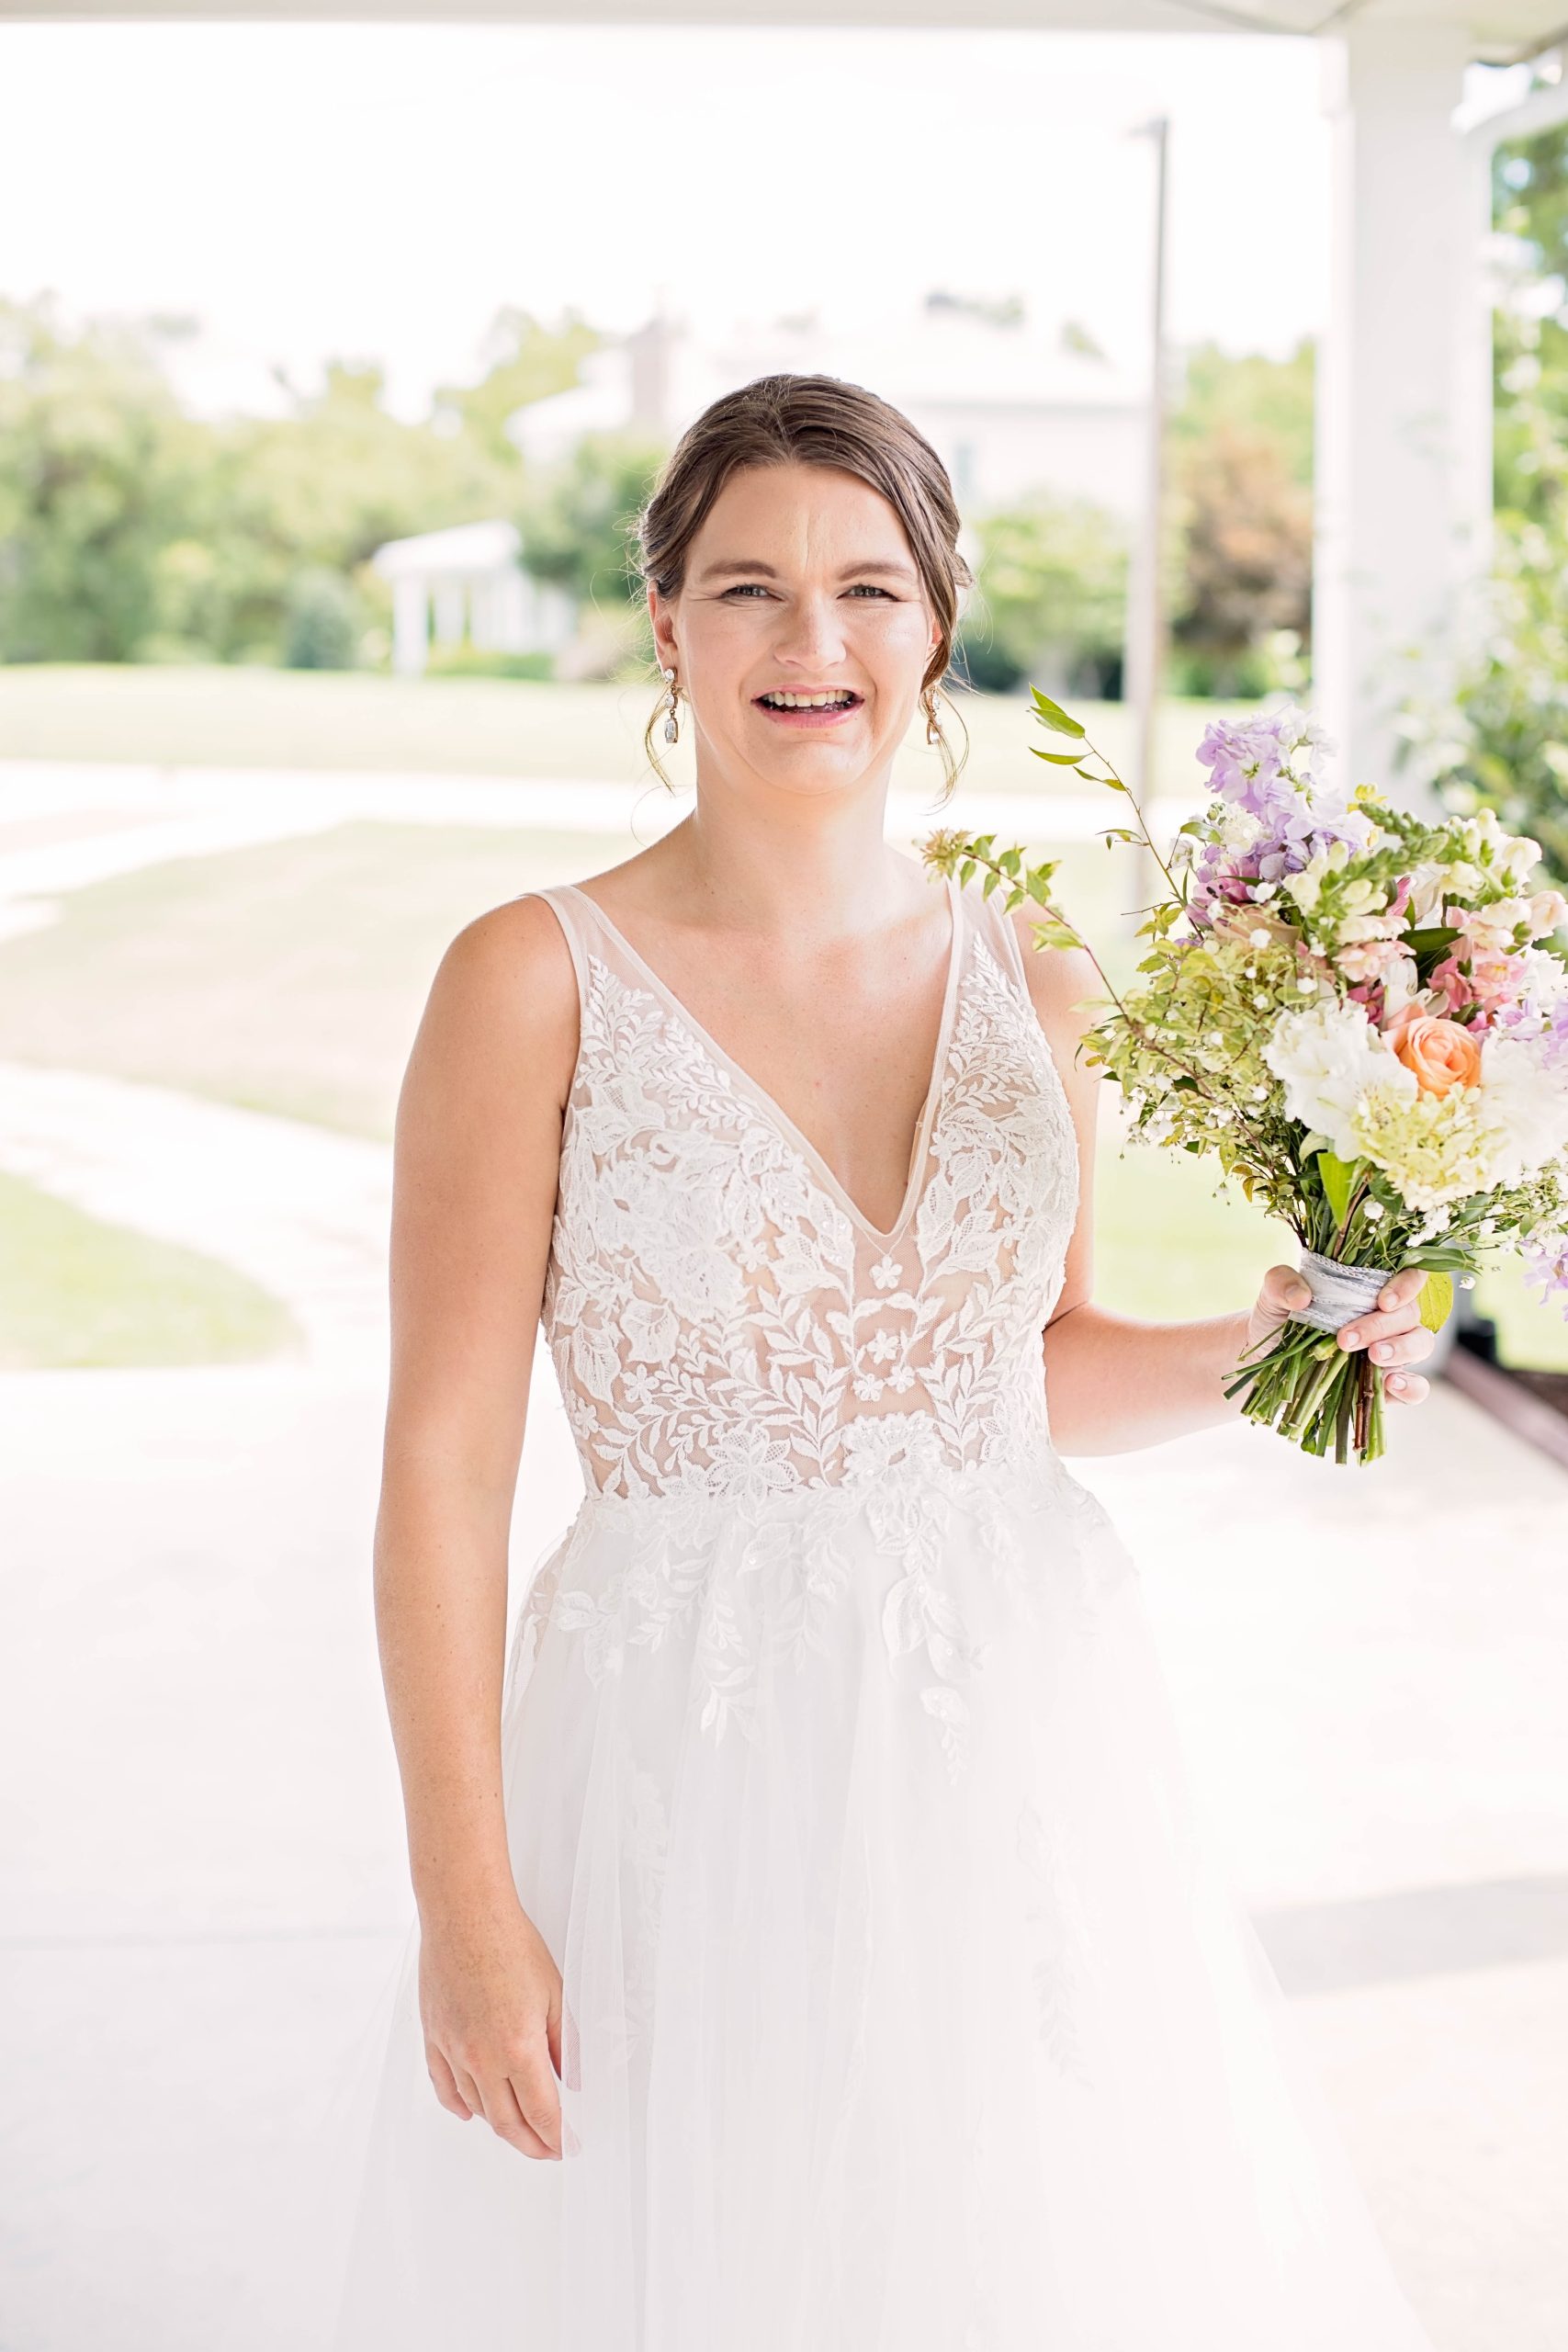 Bride With Down Syndrome Wearing Lace Wedding Dress Called Greenley Lane By Maggie Sottero For All Bodies All Brides 